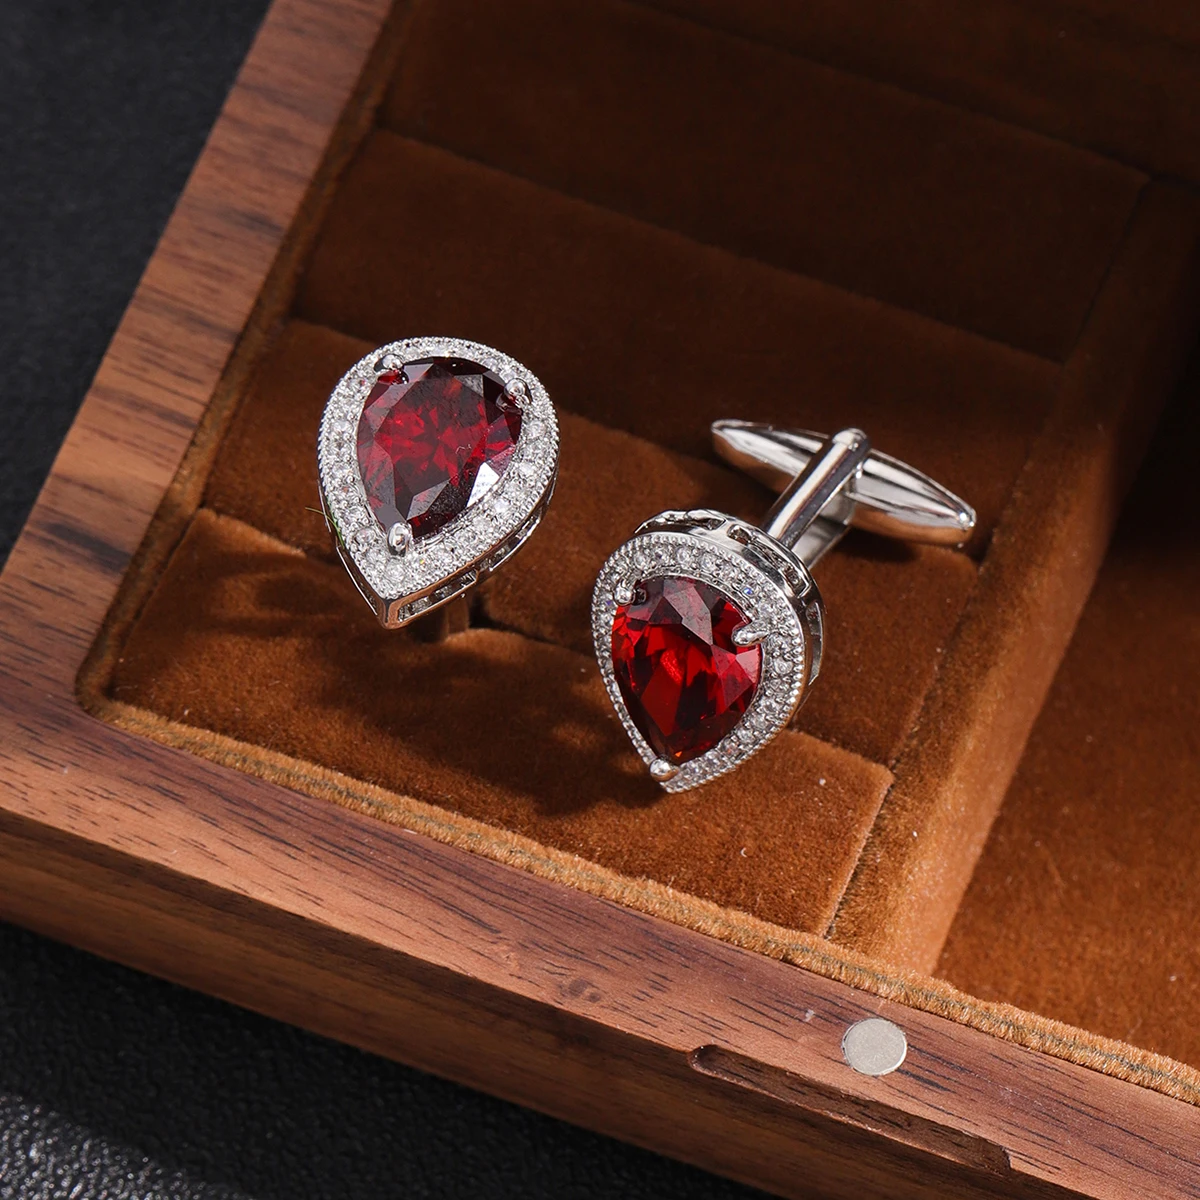 

Exquisite Men's Cufflinks Stylish Shirt Accessories and Jewelry Gifts for Grooms